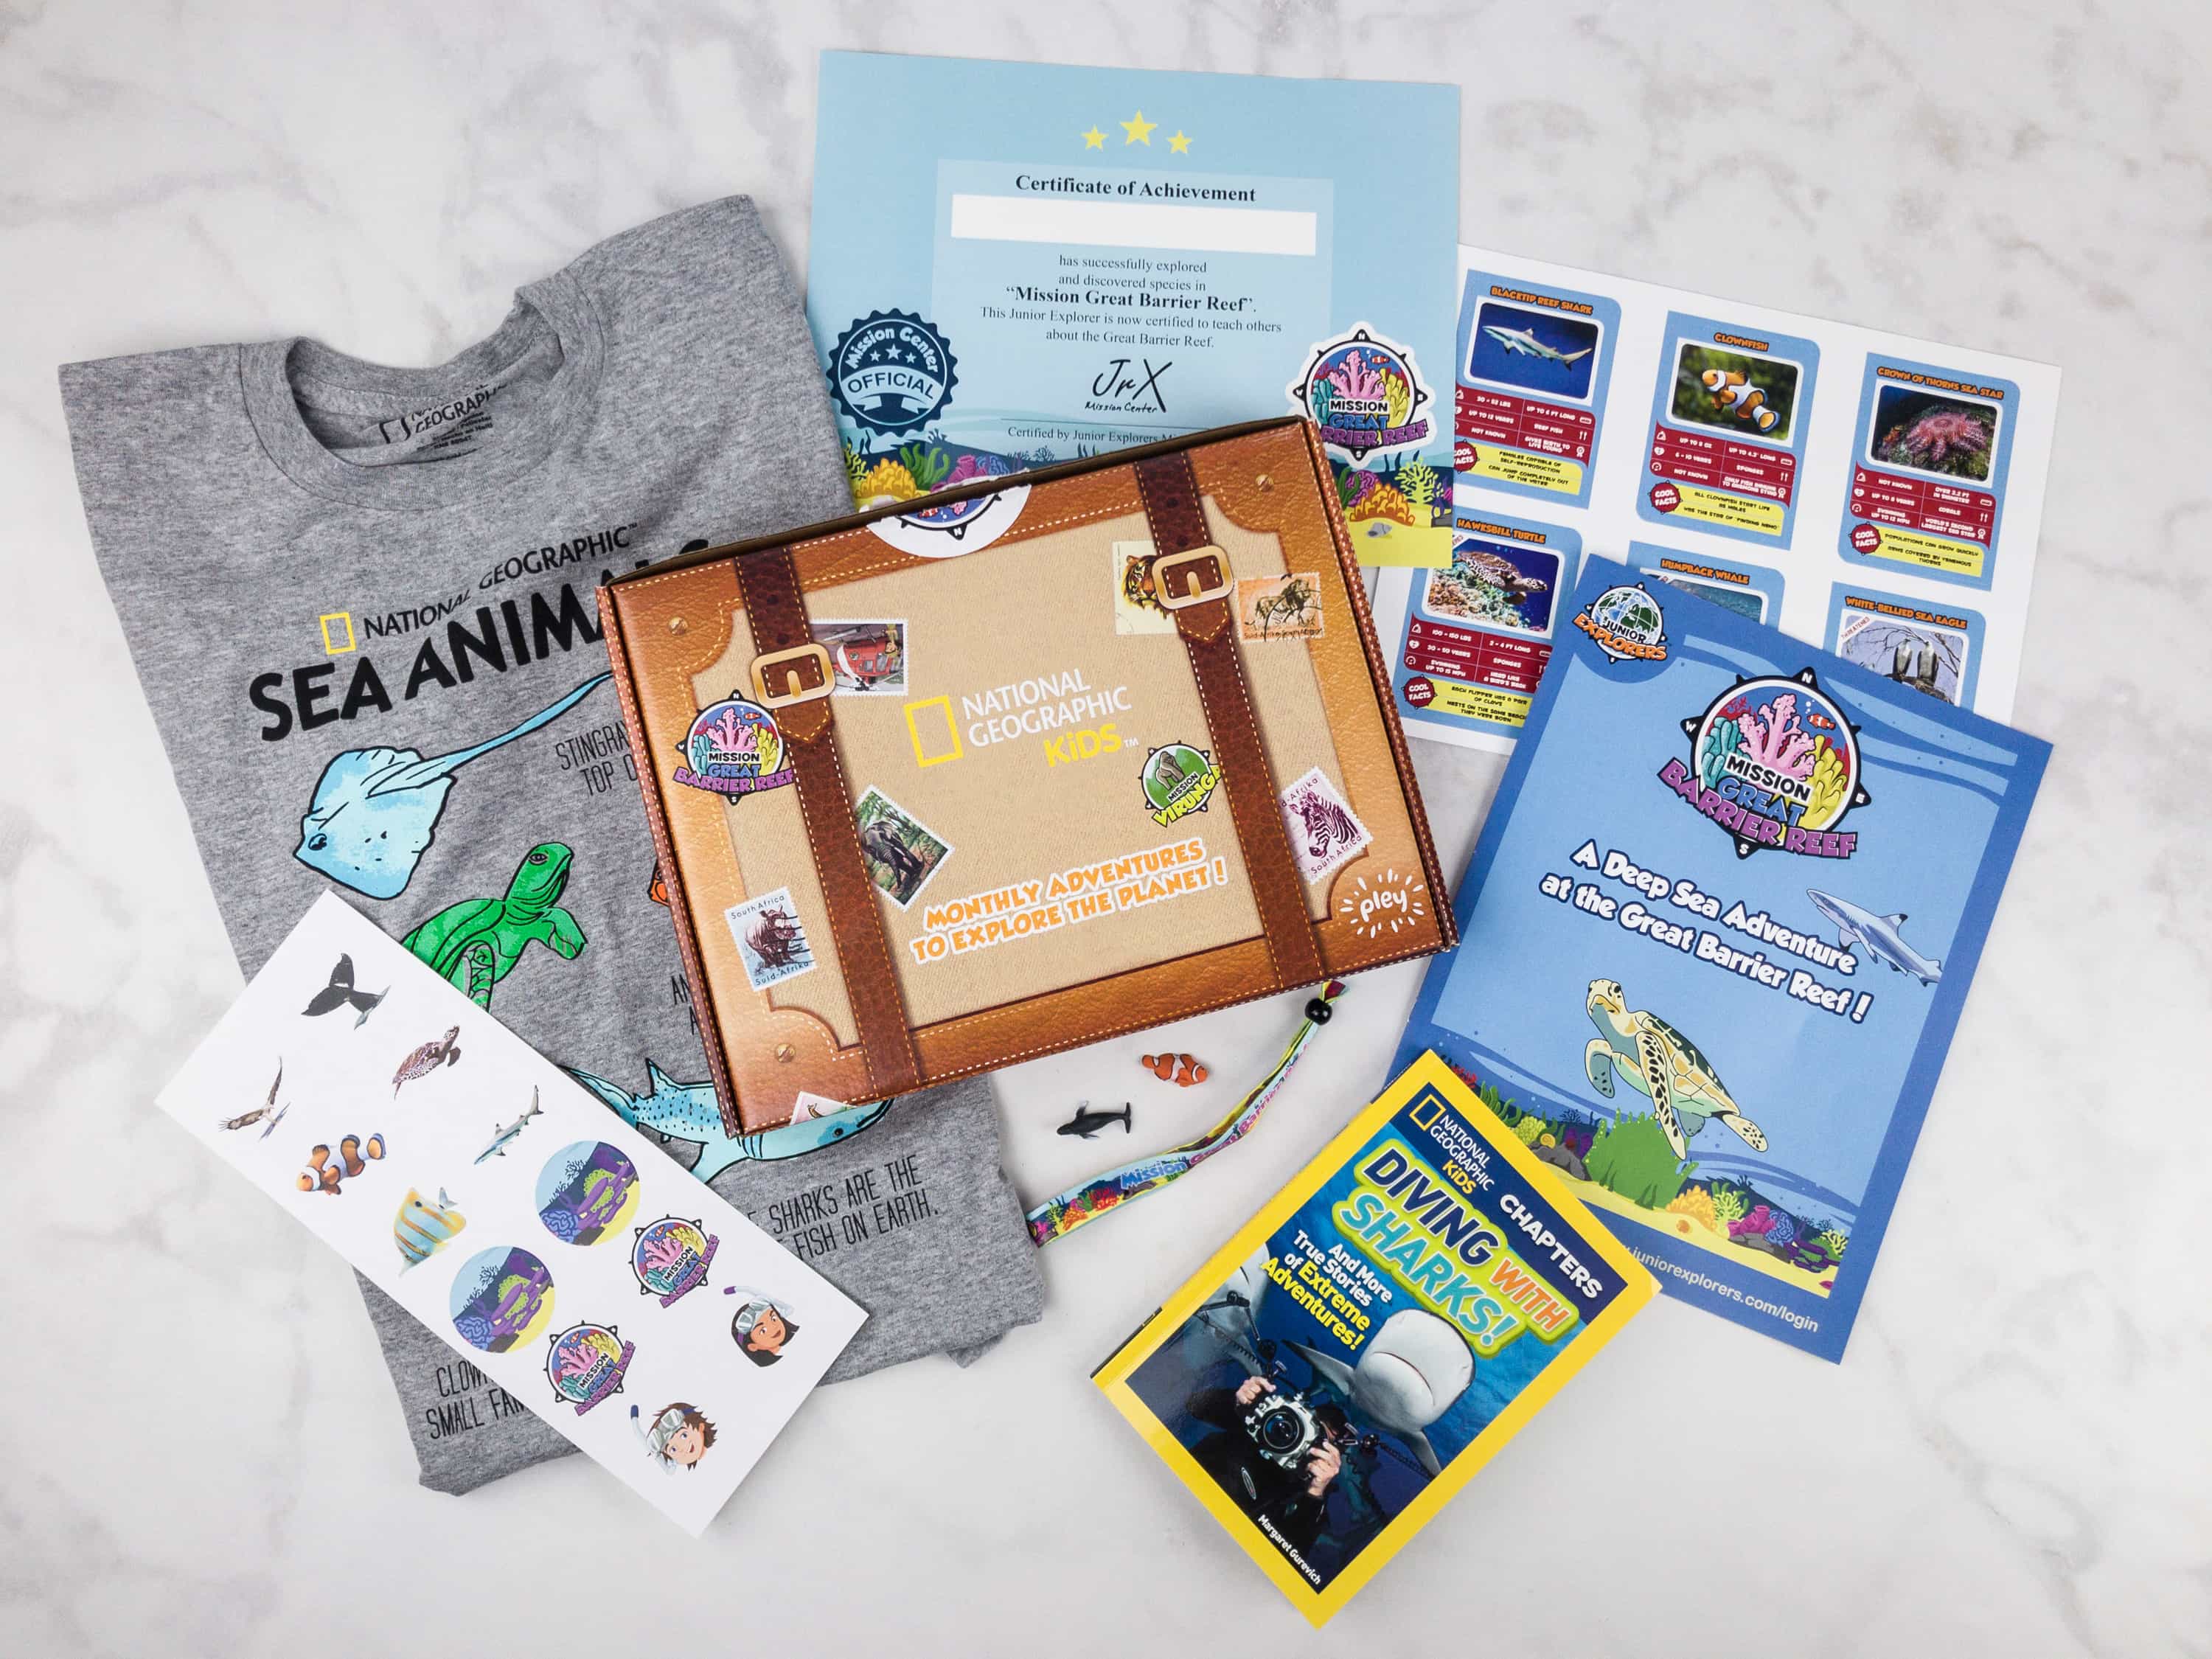 National Geographic Kids Subscription Box Launches from Pley.com - National  Geographic Partners